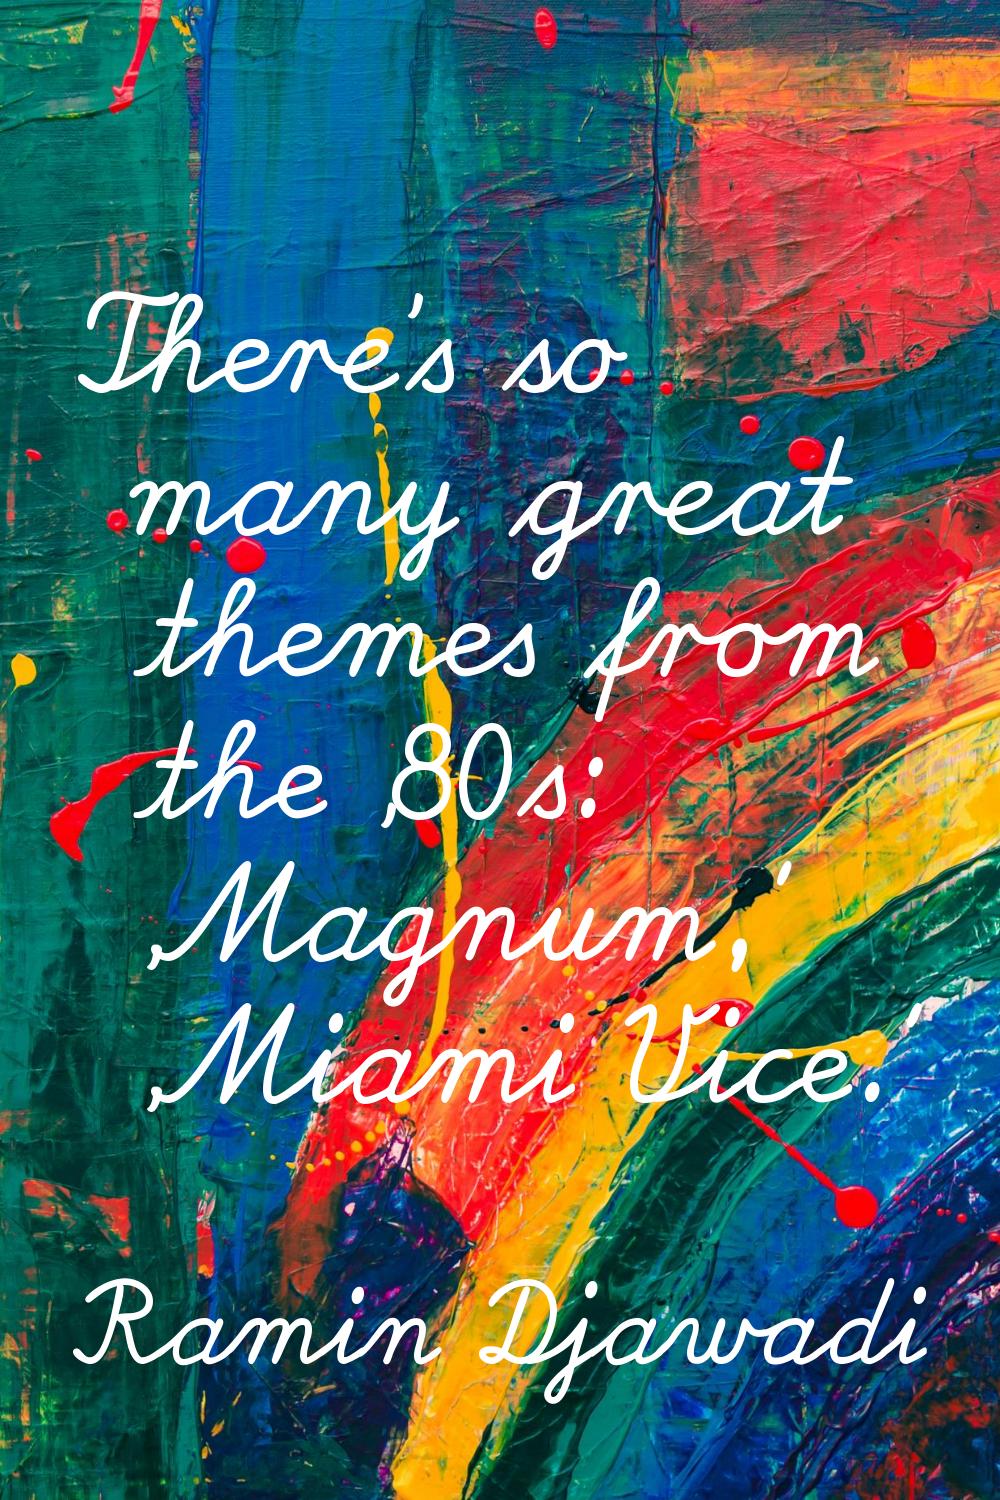 There's so many great themes from the '80s: 'Magnum,' 'Miami Vice.'